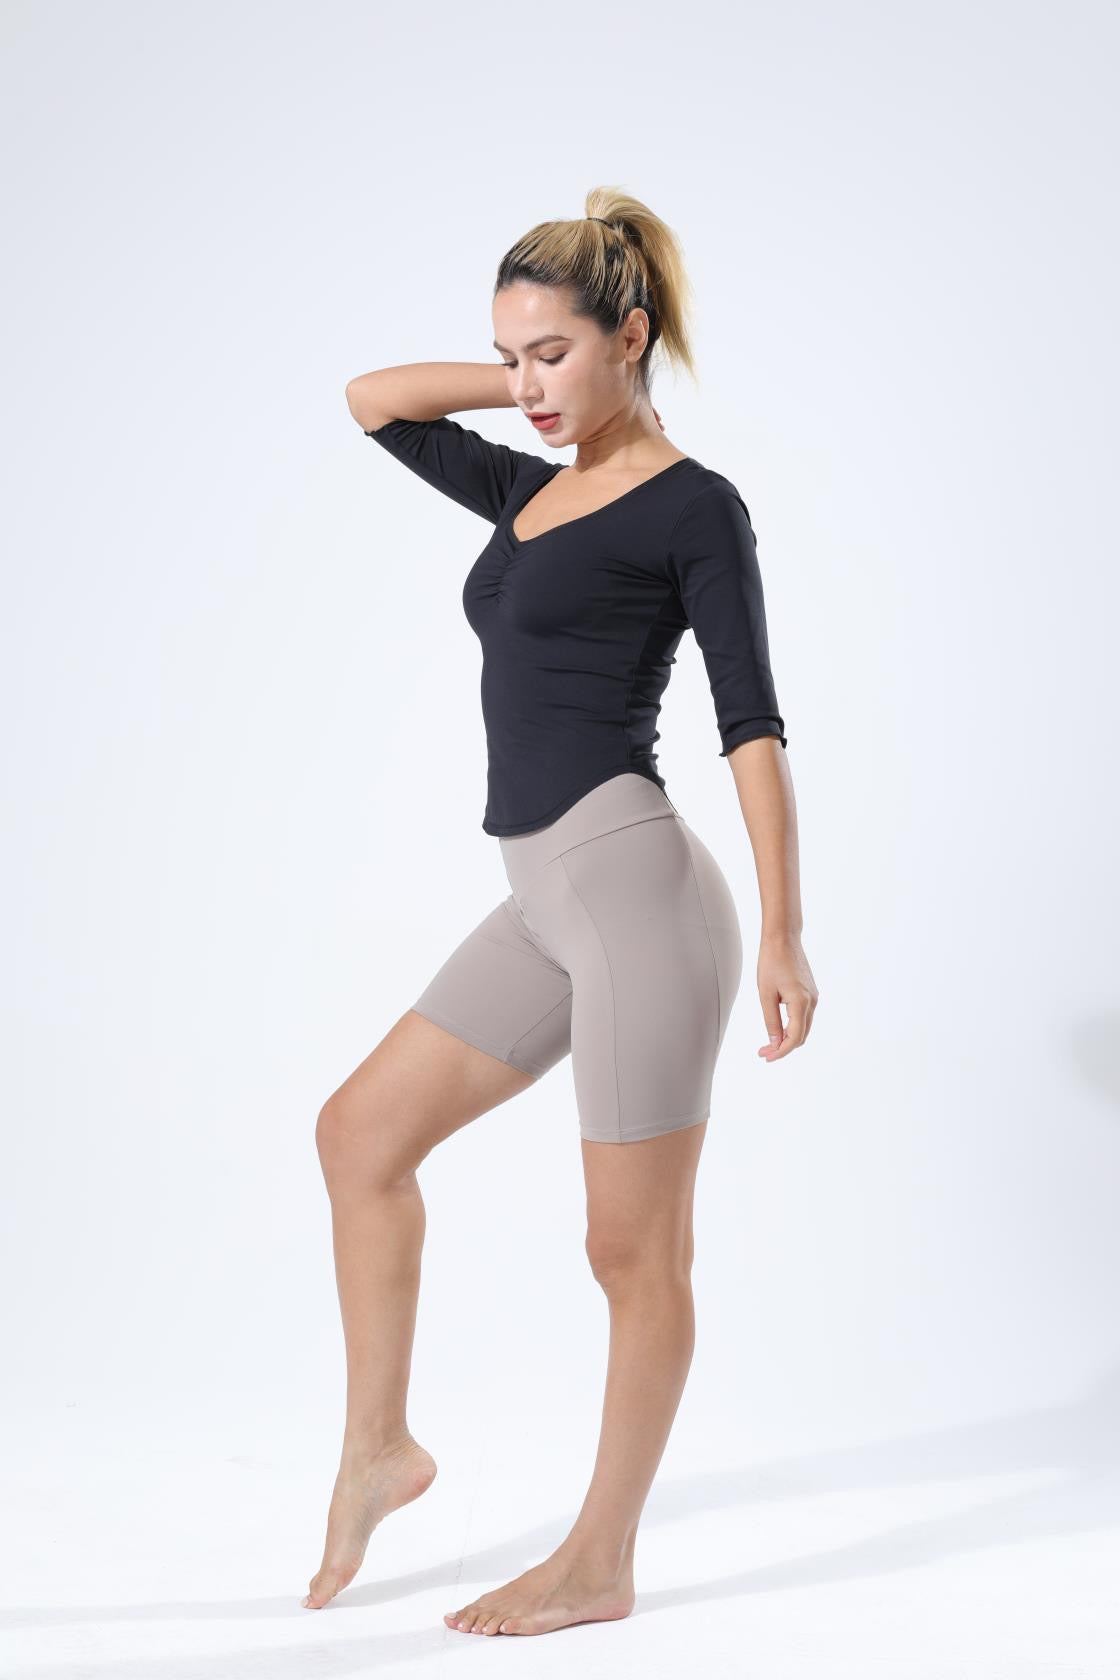 HauteD - DK Victory Mid-Thigh Short